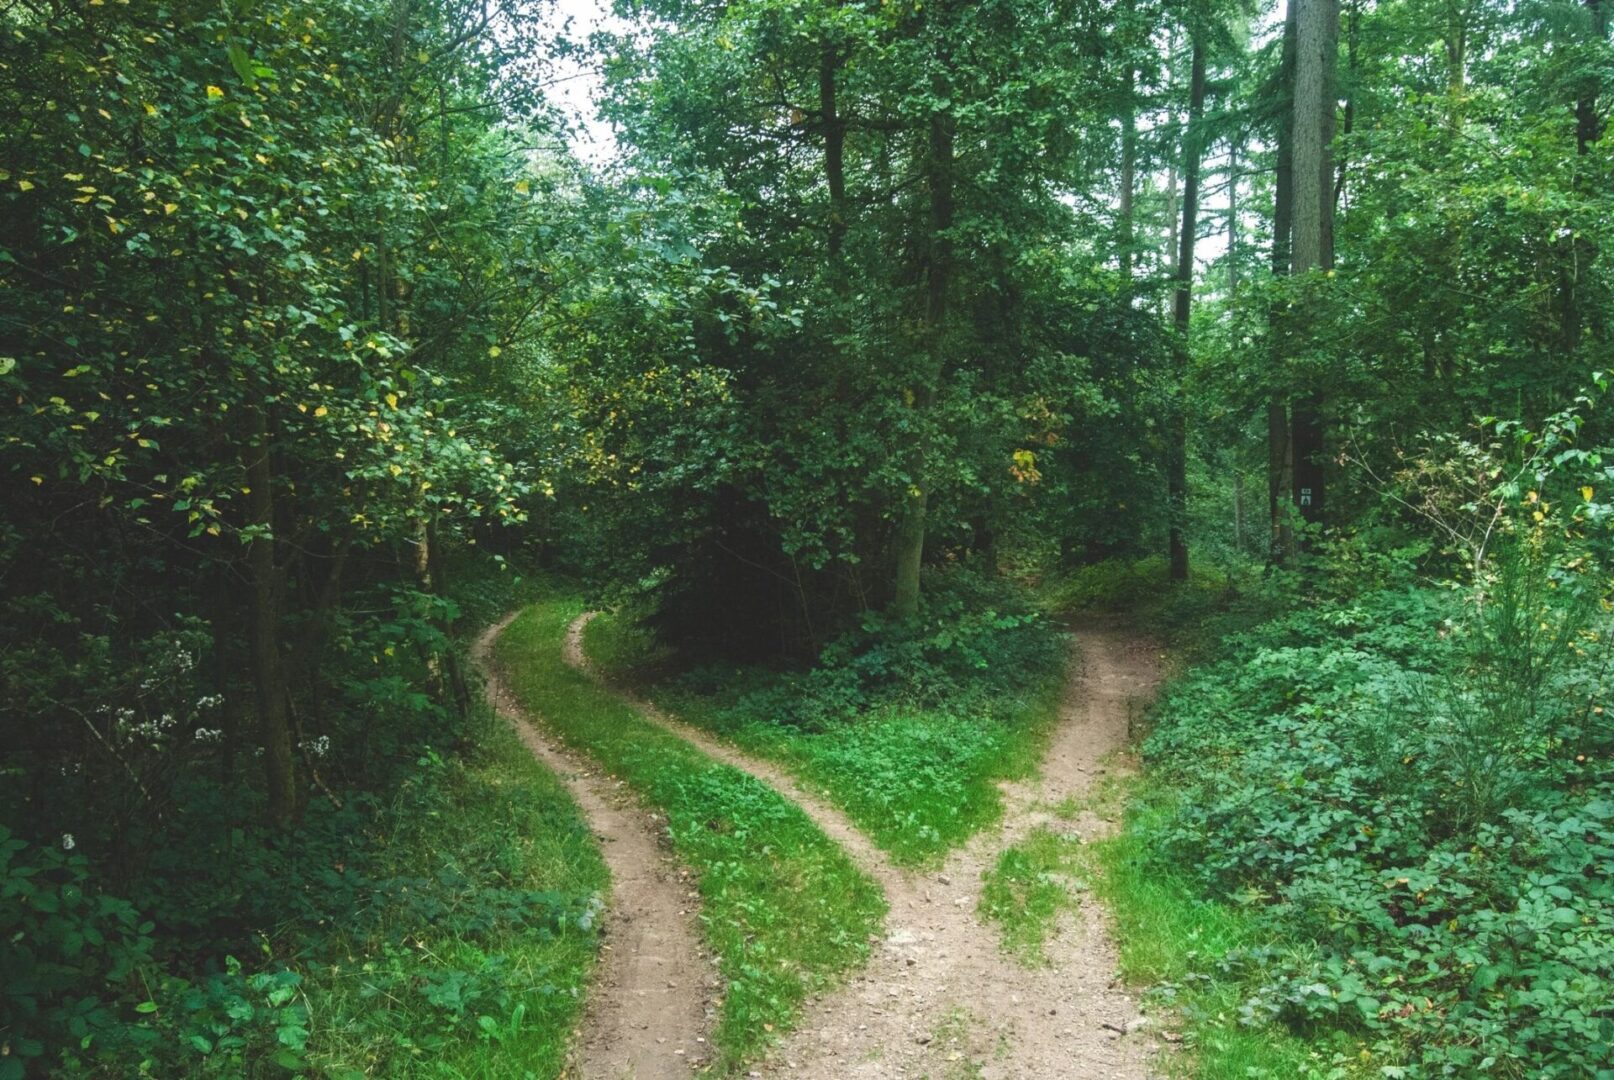 Two roads in the middle of a forest